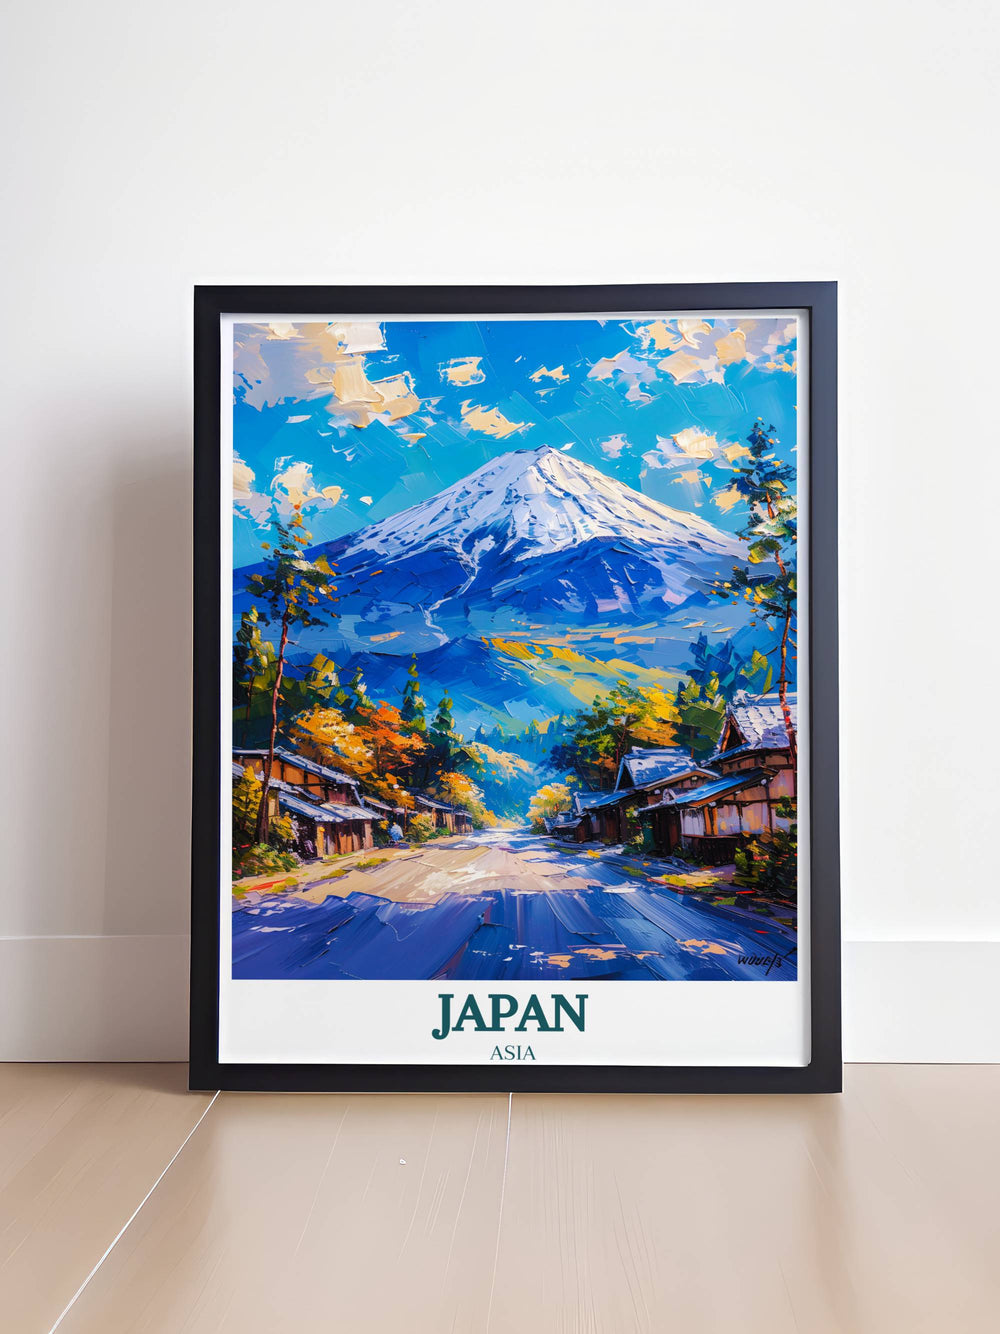 Wall art of Japan showcasing Mount Fuji, a stunning addition to home décor for lovers of Japanese culture.